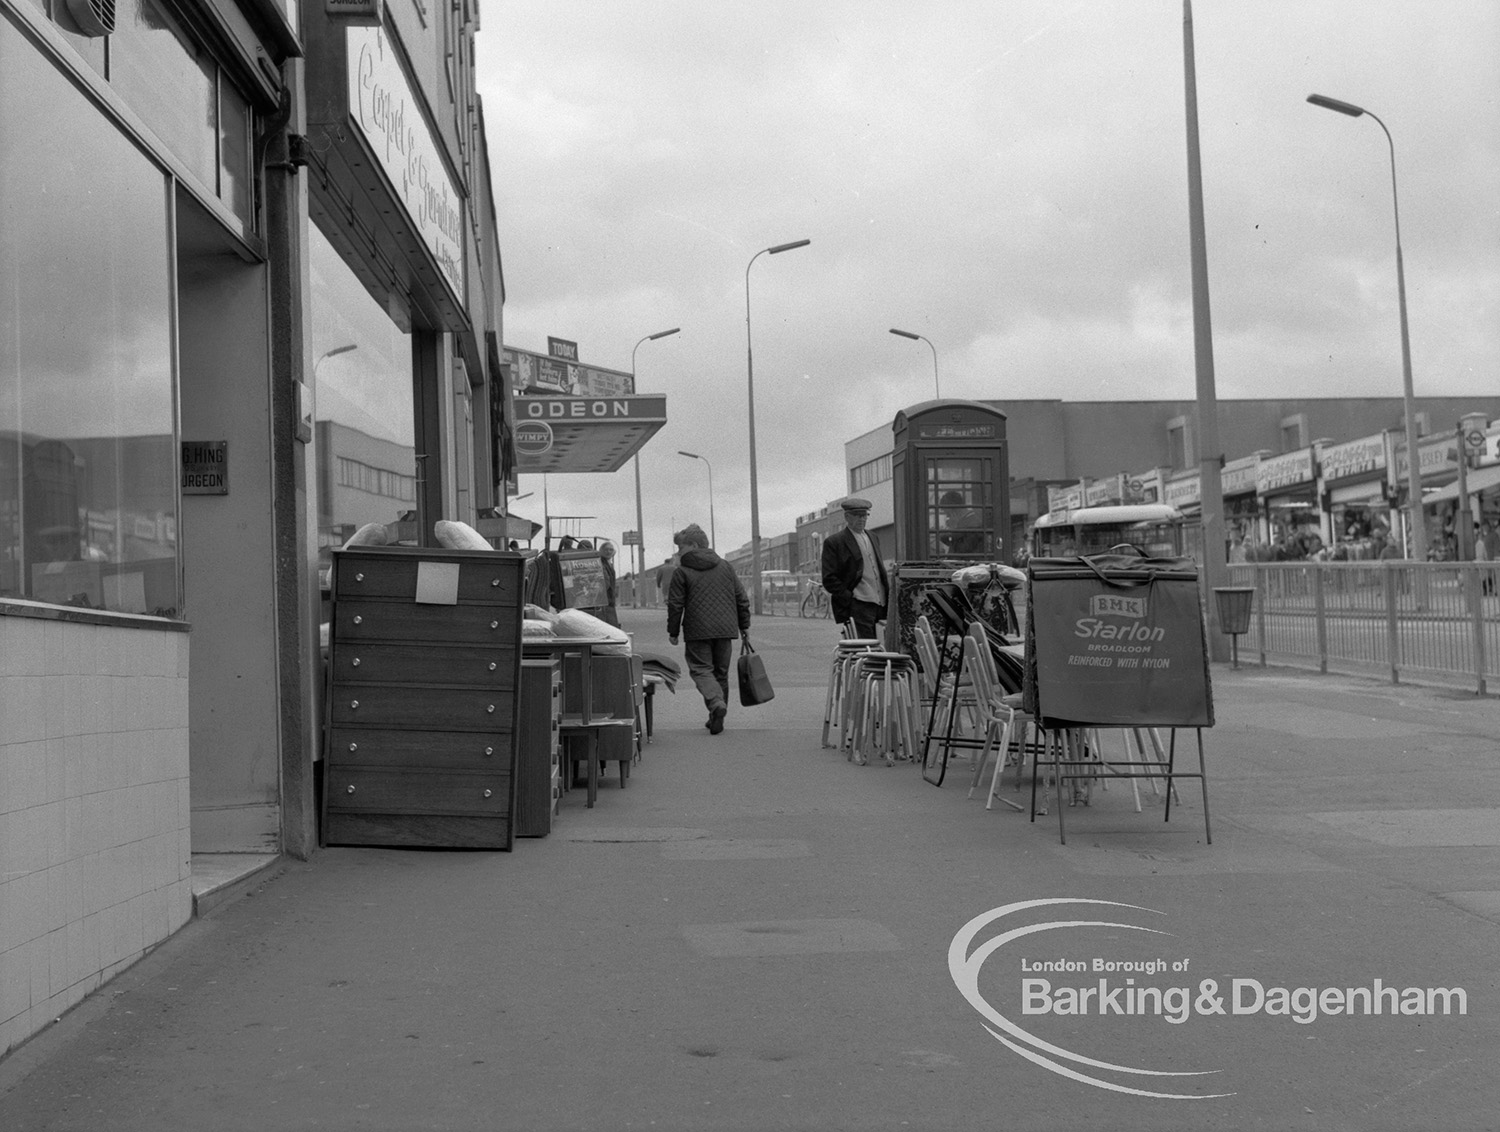 London Borough Of Barking Shops Act Inspector Showing Furniture Obstructing Pavement At 274 Heathway Dagenham Looking South 1969 Barking And Dagenham Archive Photos